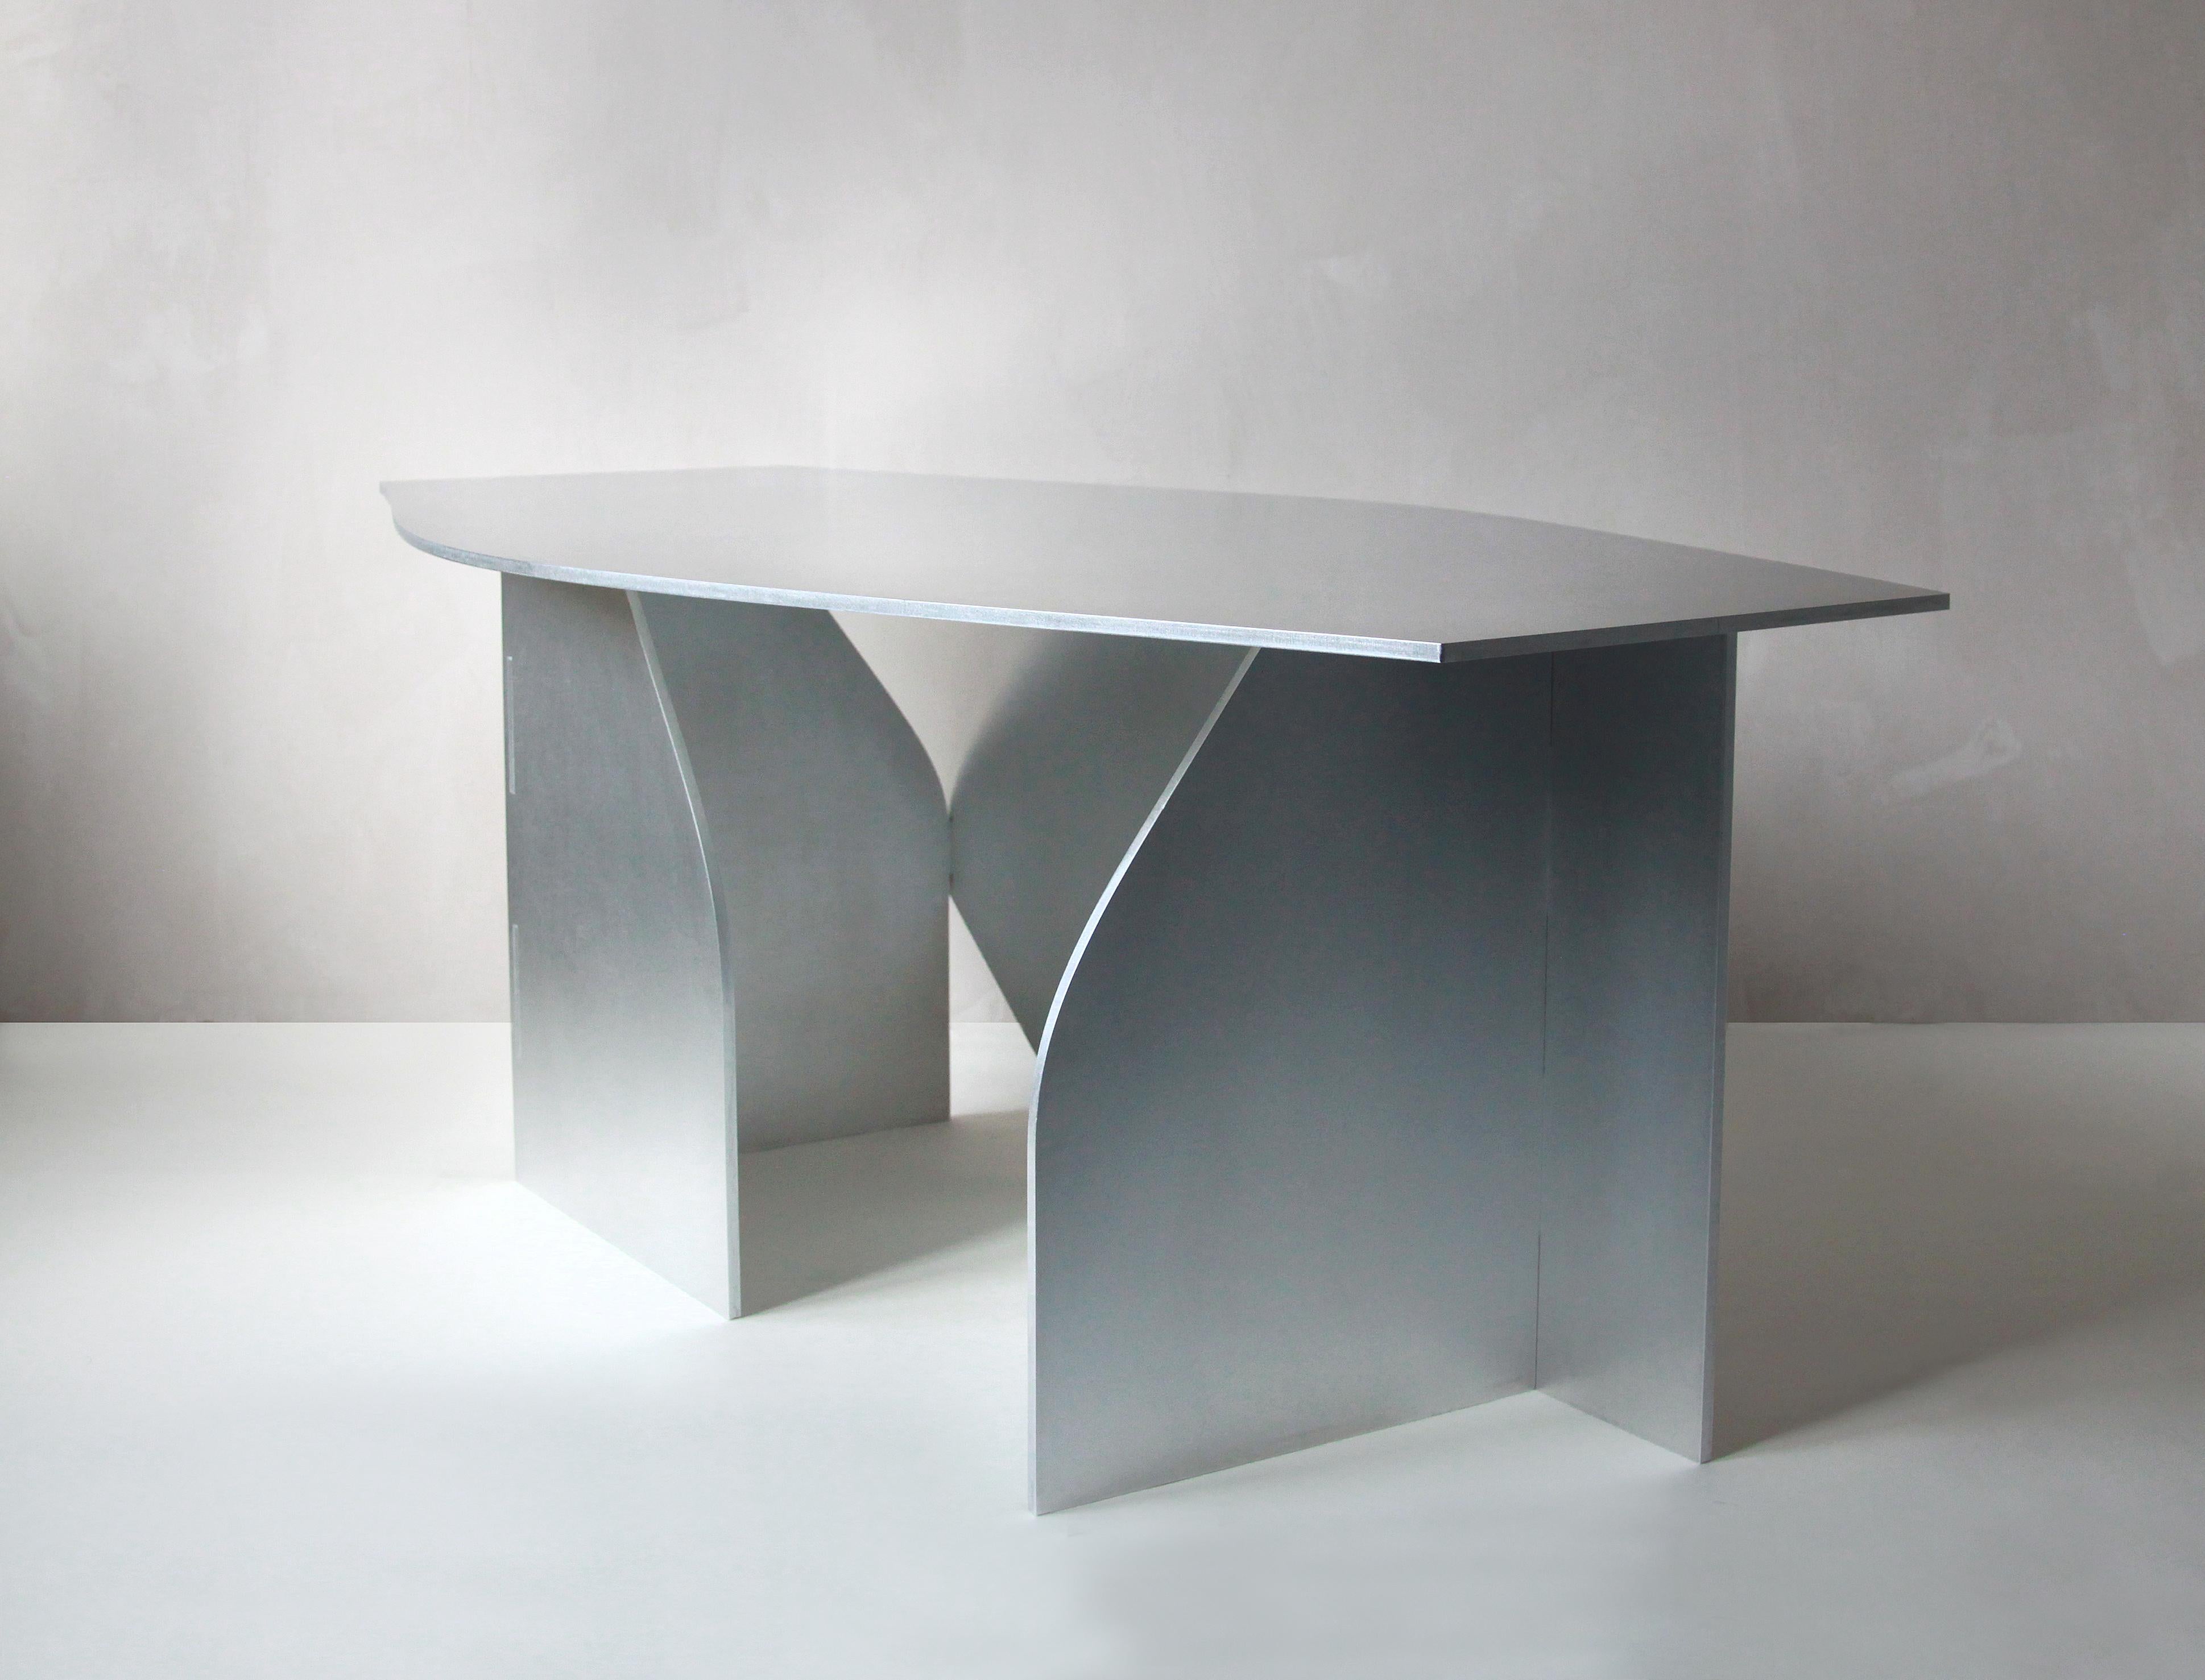 Gaze table by Maria Tyakina
Edition: 8 + 1 AP
Dimensions: L 130 x W 70 x H 46 cm
Materials: Aluminium, brushed, waxed
Material thickness: 8 mm

Navigating between art and design, Maria's work focuses on the relationship between human and